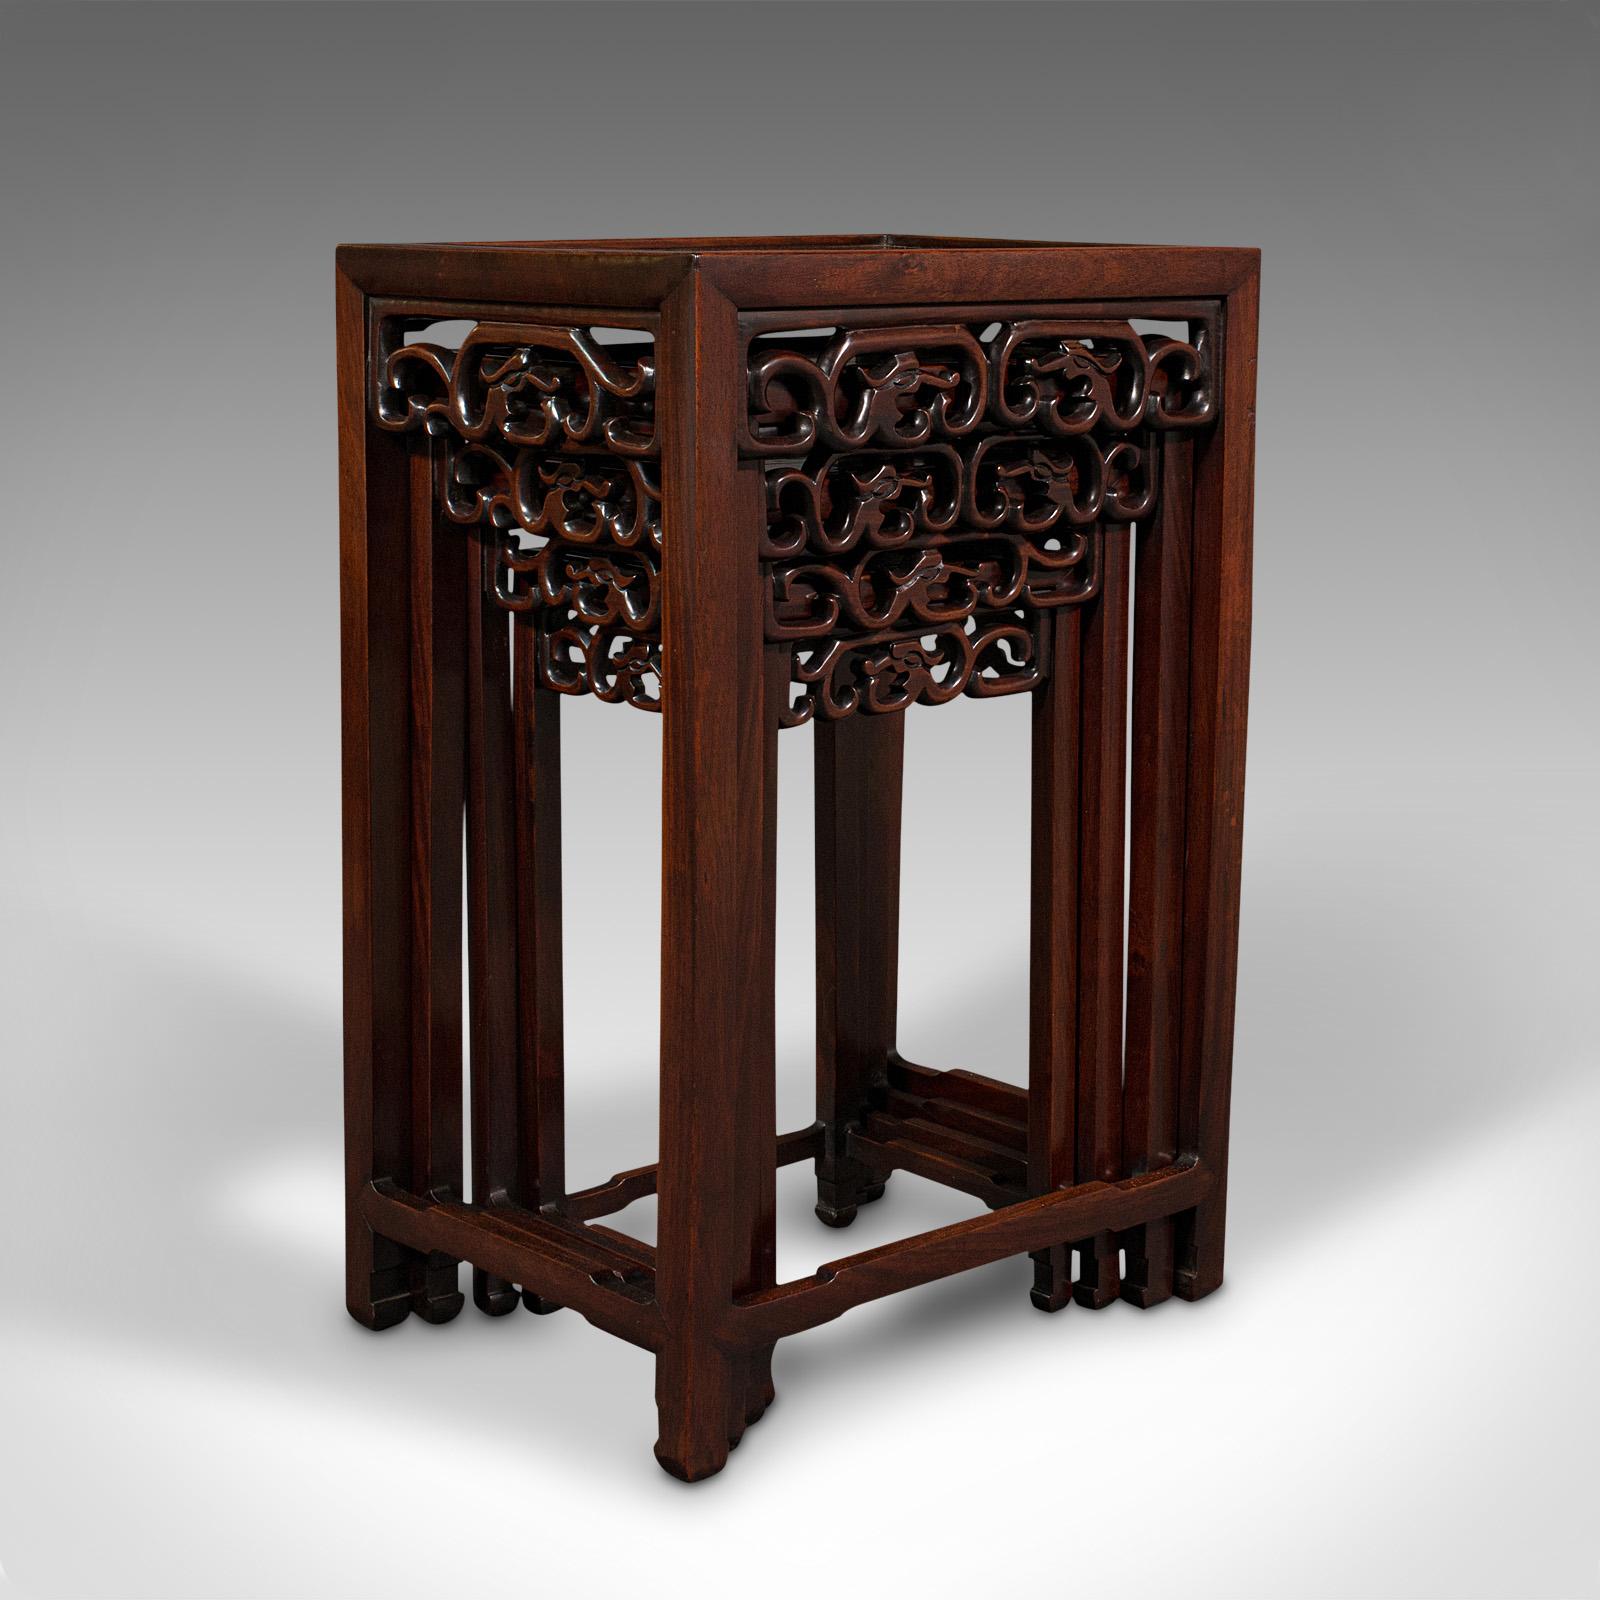 Wood Antique Quartetto Nesting Tables, Chinese, Occasional, Victorian, Circa 1900 For Sale